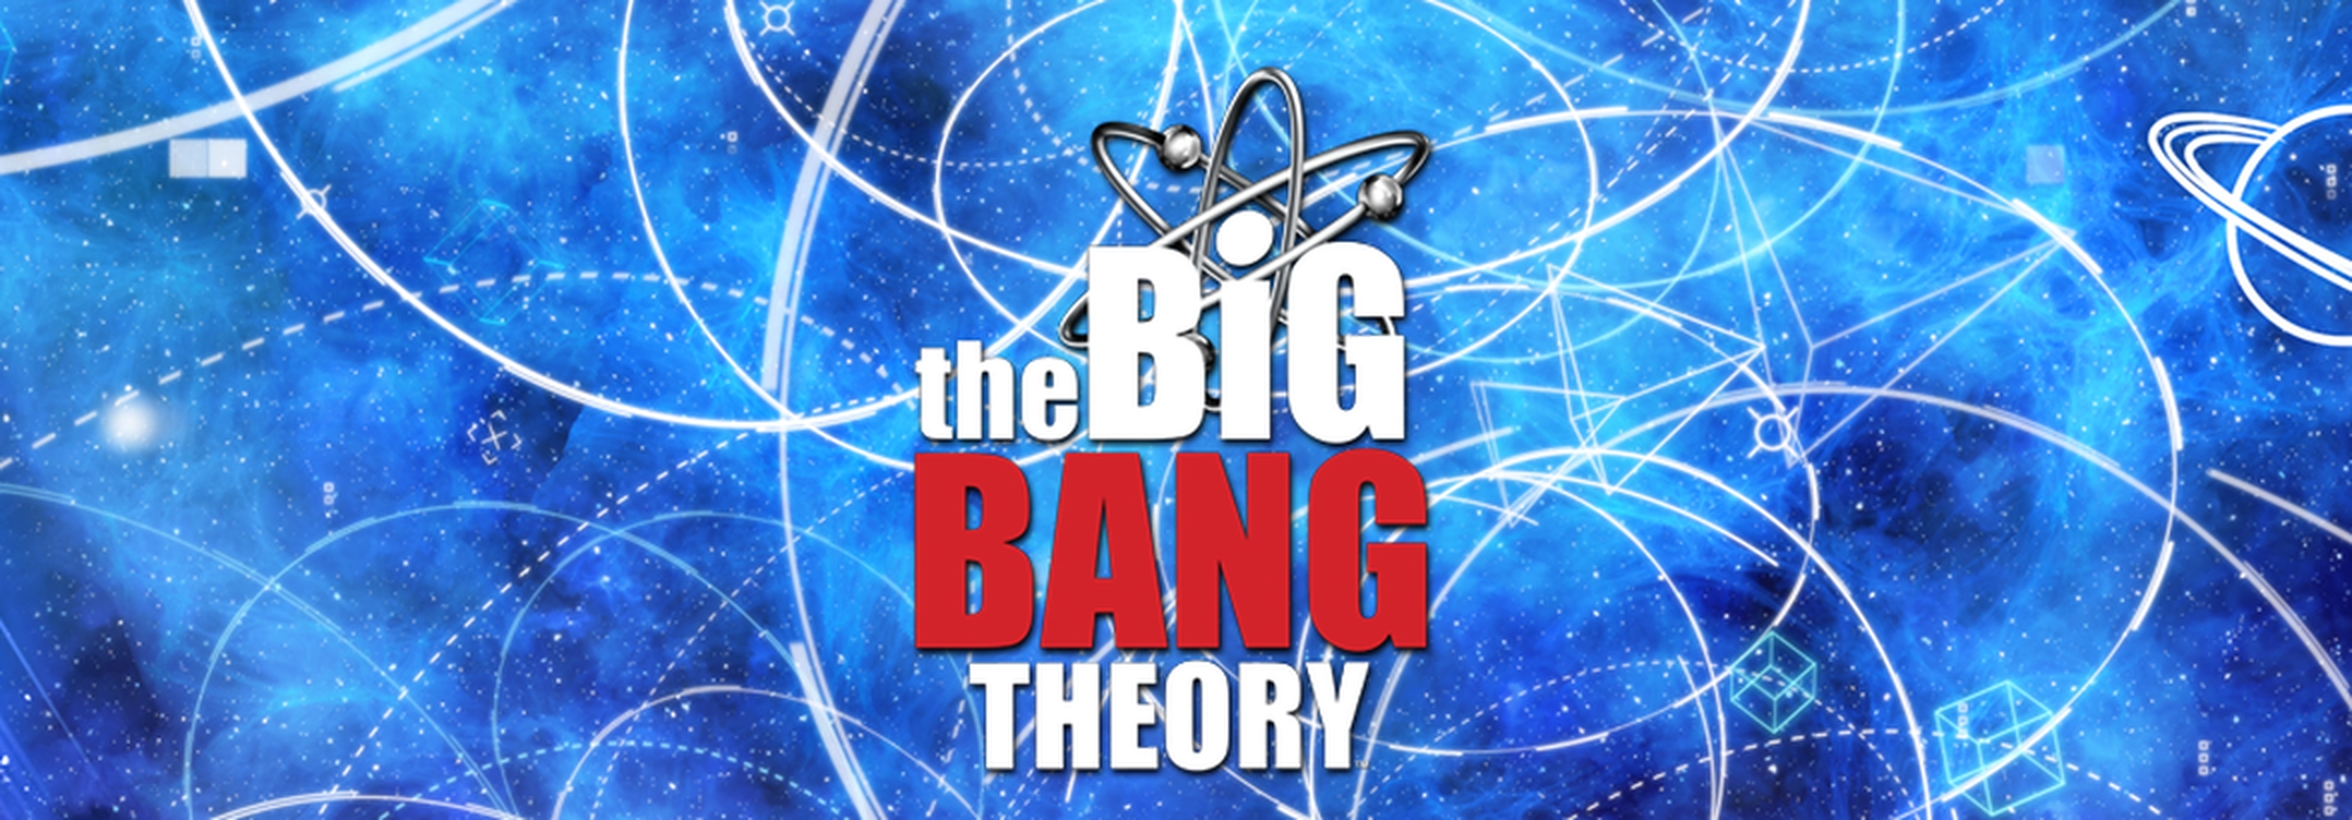 The The Big Bang Theory Online Slot Demo Game by Aristocrat